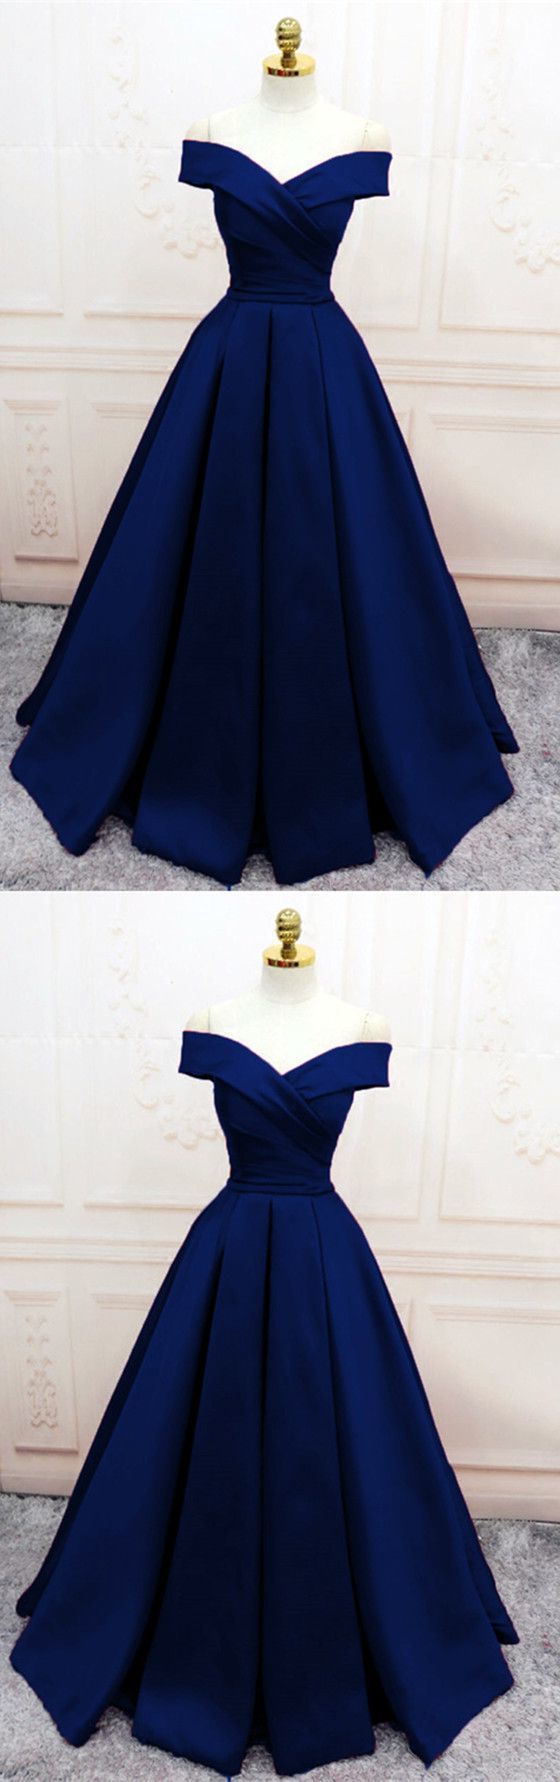 Navy Blue Satin V Neck Off Shoulder Corset Prom Dresses, Long Evening Gowns outfit, Prom Dresses Long Navy